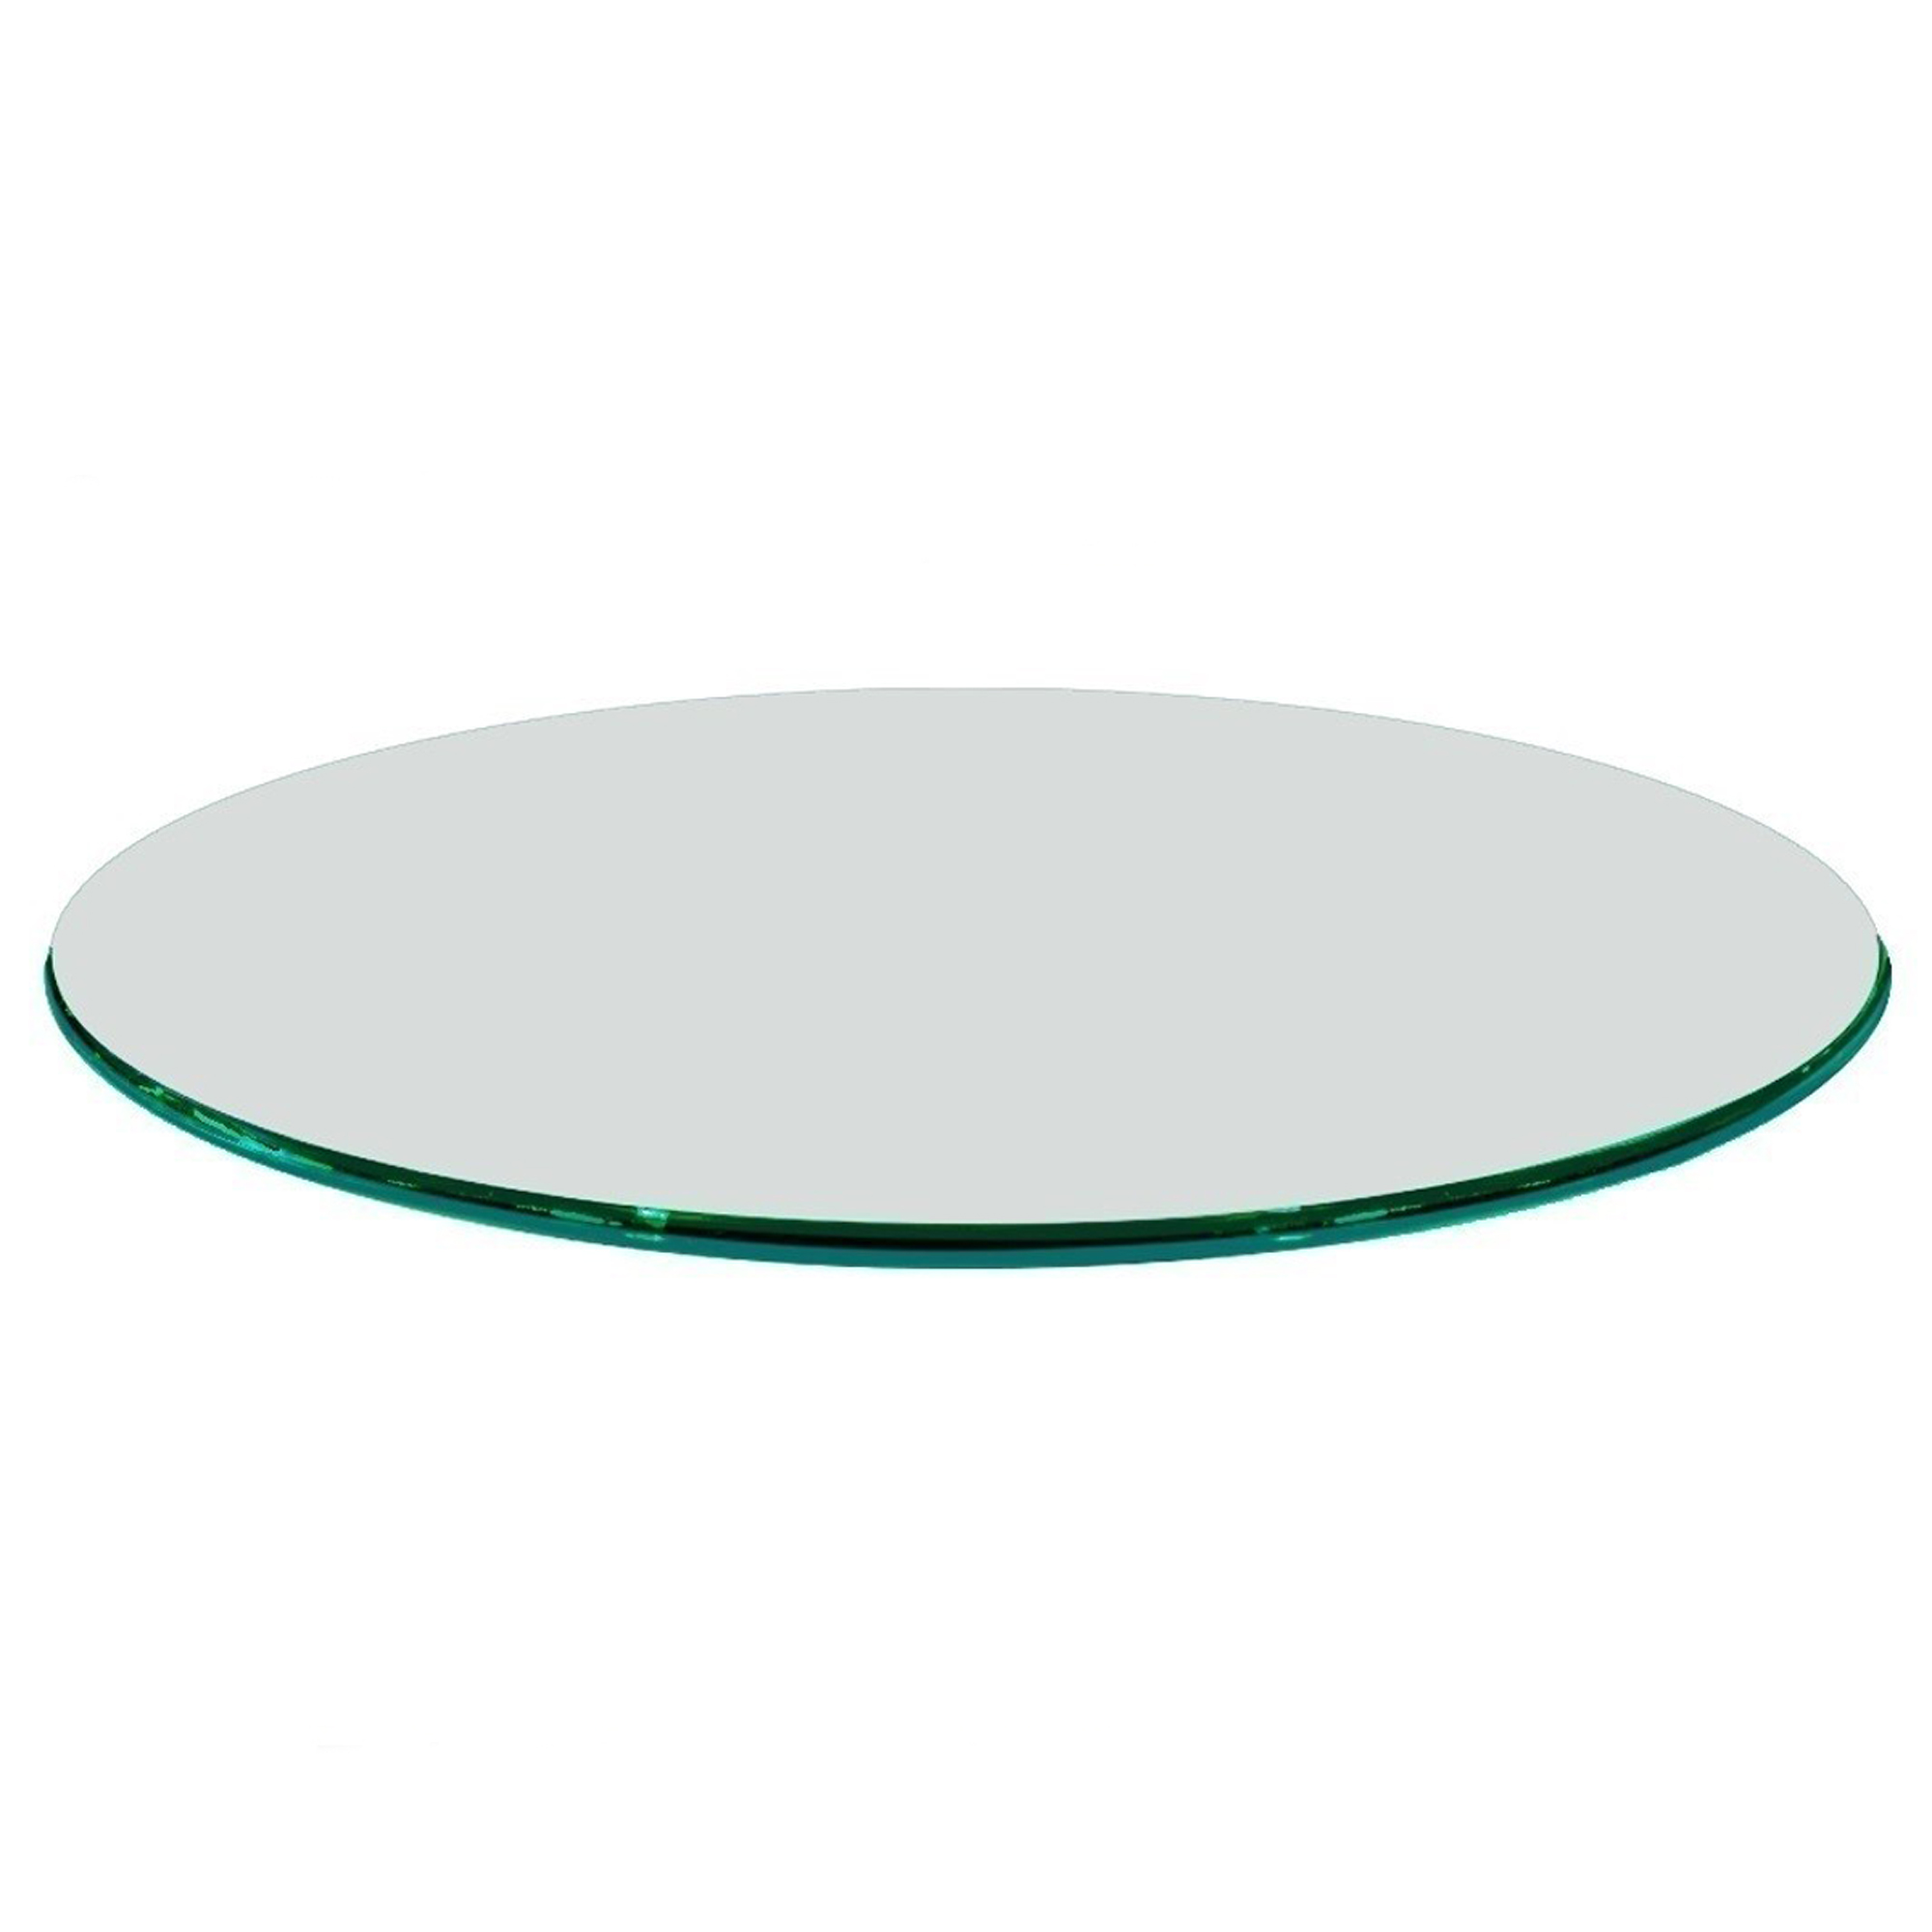 72 Round Glass Table Top